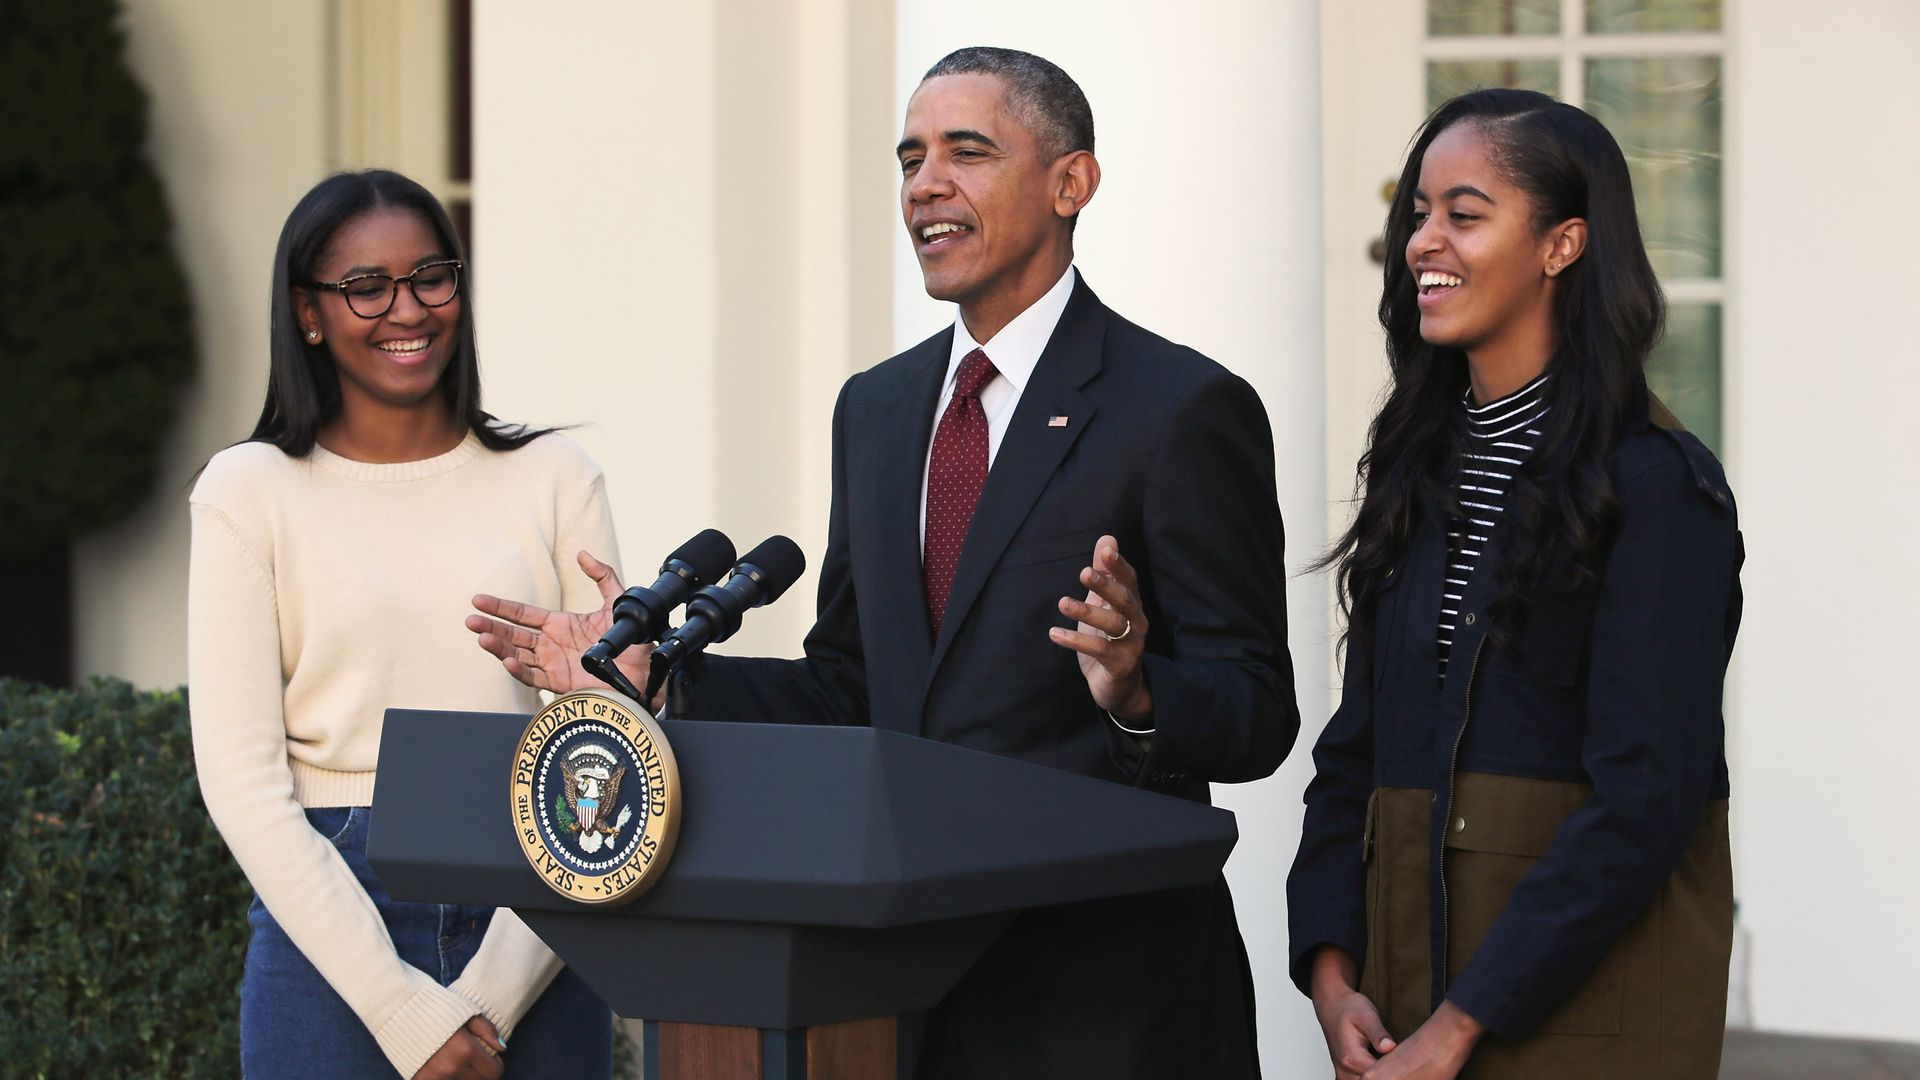 Michelle Obama shares rare candid photo of daughters Malia and Sasha to honor Barack Obama's special day